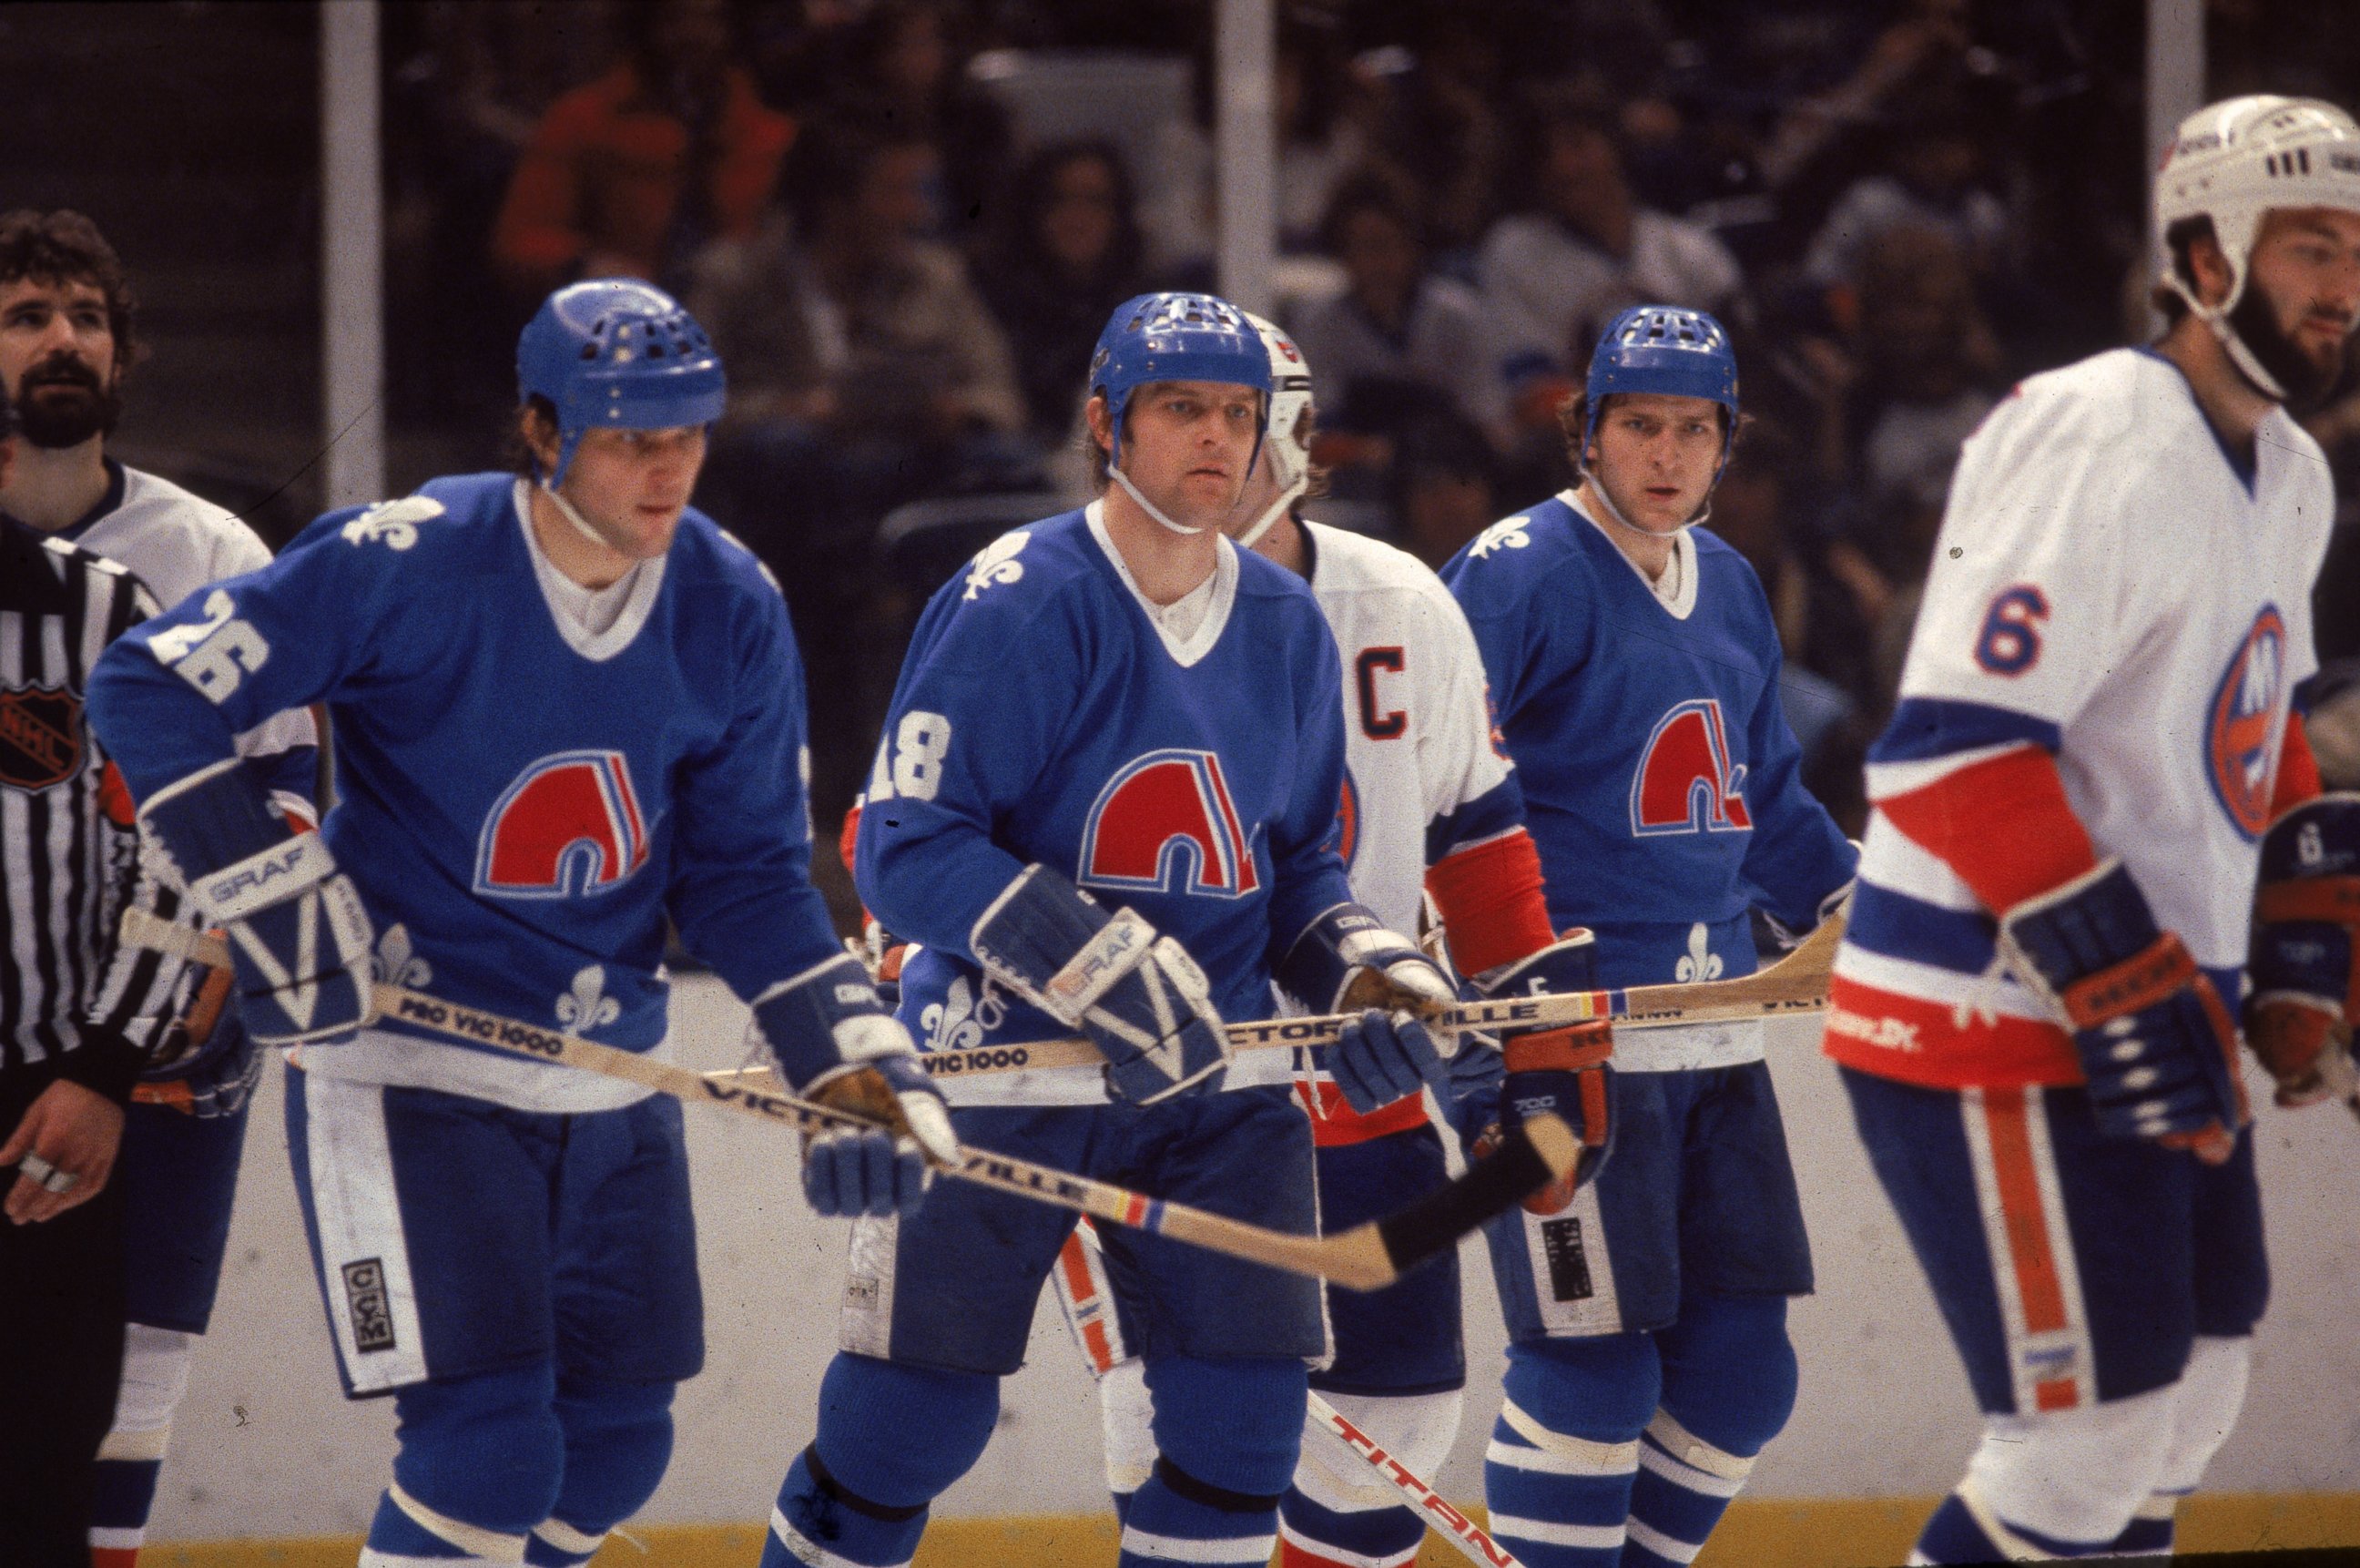 PHOTO: Czech ice hockey playing brothers, Peter Stastny (L)), Marian Stastny (C), and Anton Stastny, of the Quebec Nordiques are seen on the ice in a game against the New York Islanders at Nassau Coliseum in Uniondale, New York, early 1980s.